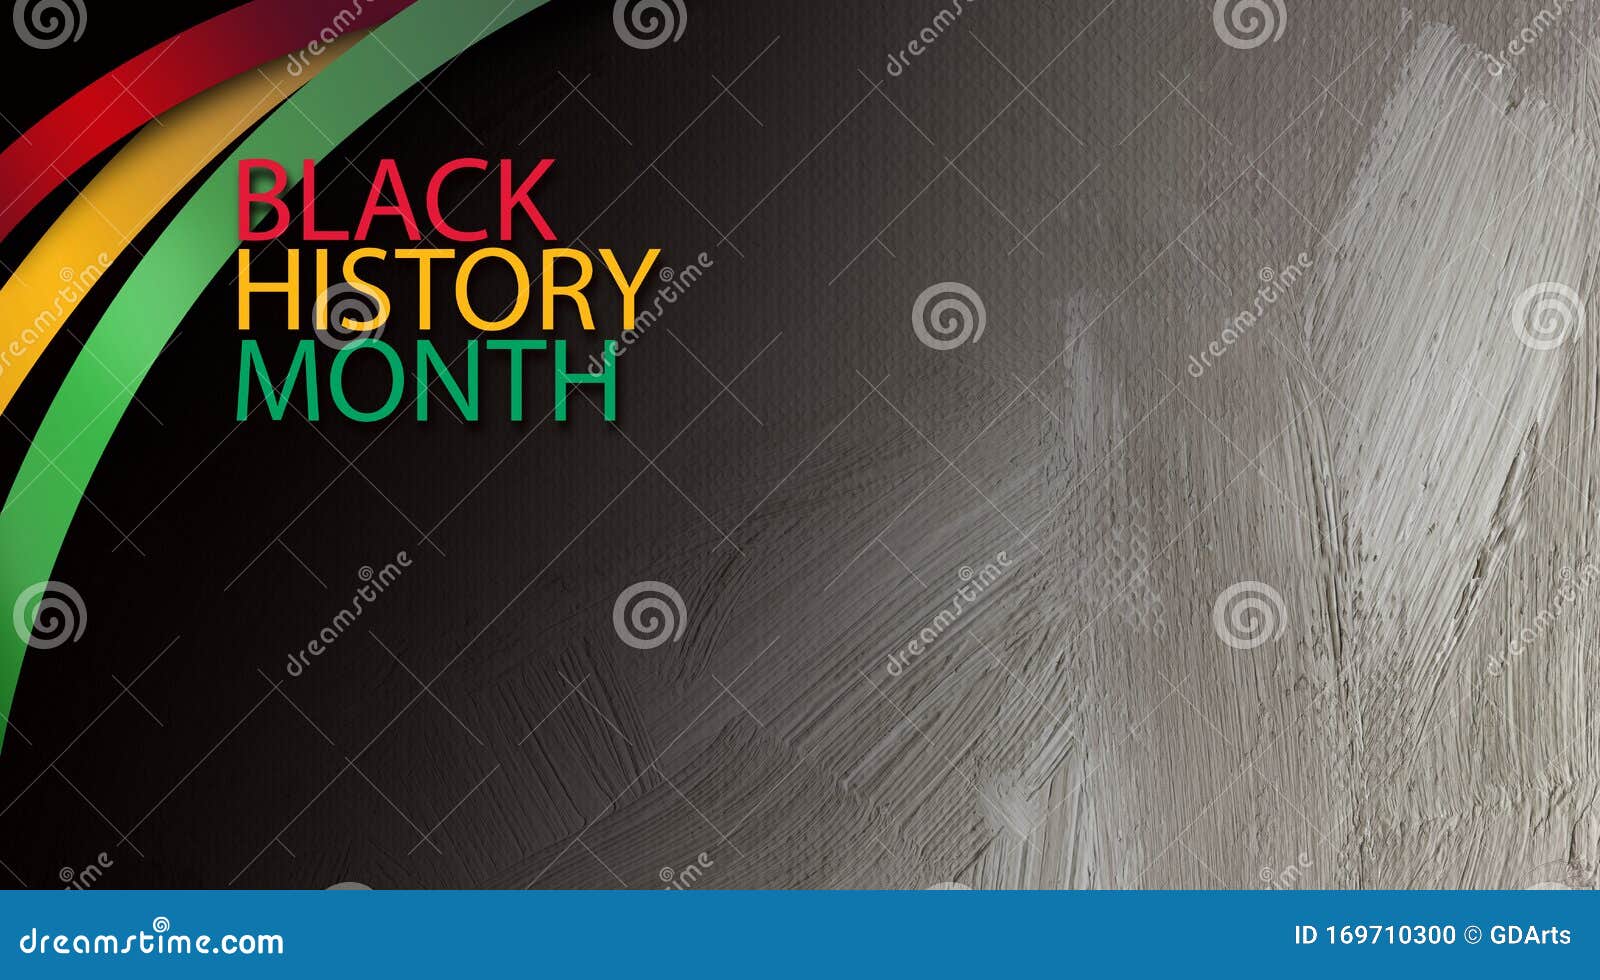 black history month title treatment with ribbons graphic background